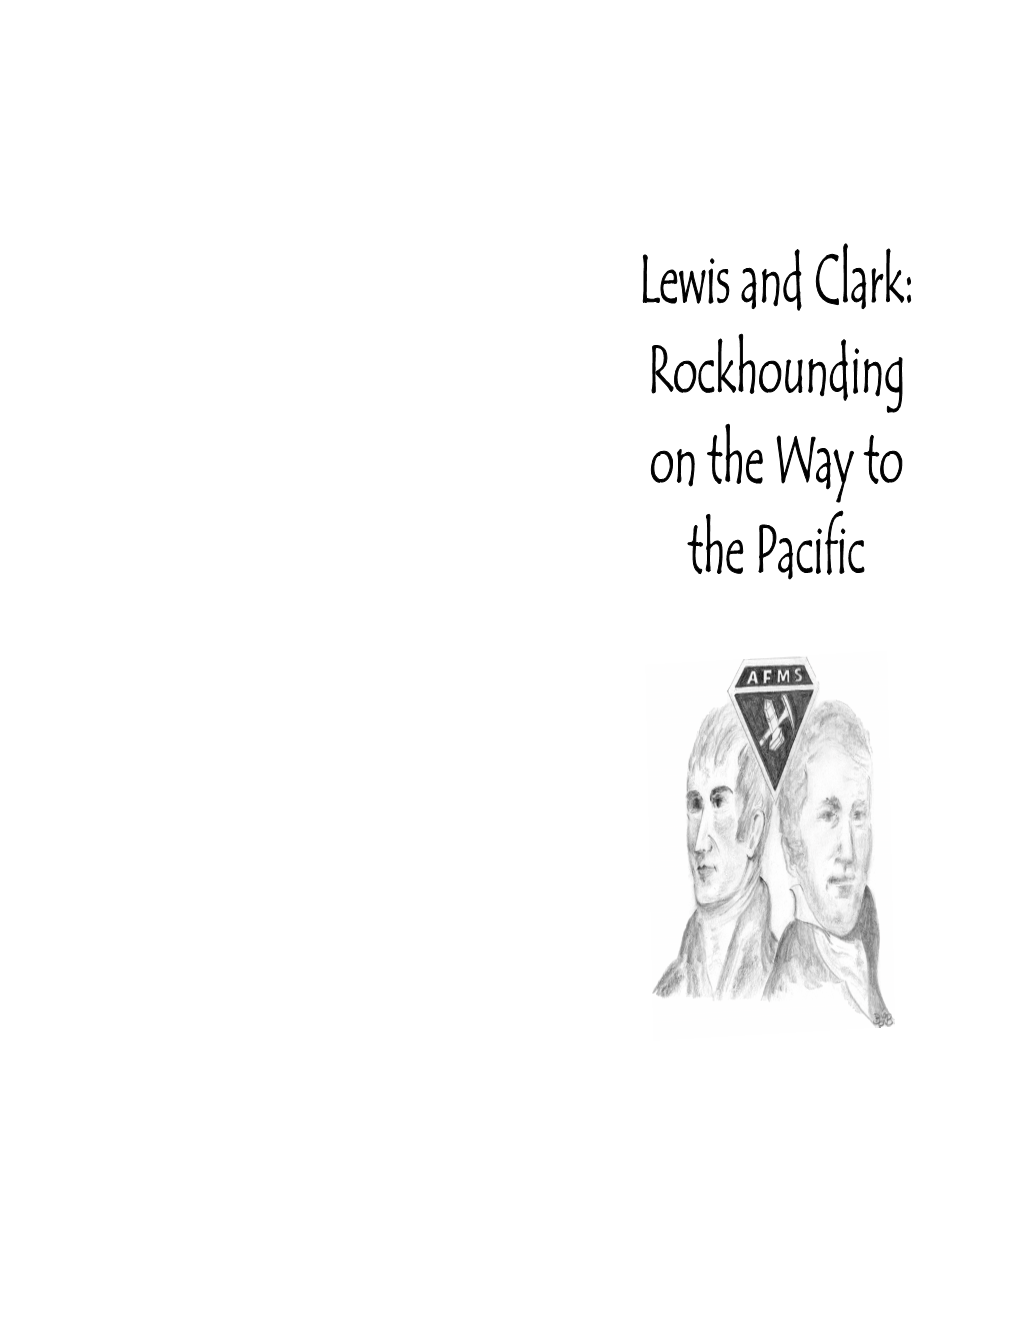 Lewis and Clark: Rockhounding on the Way to the Pacific